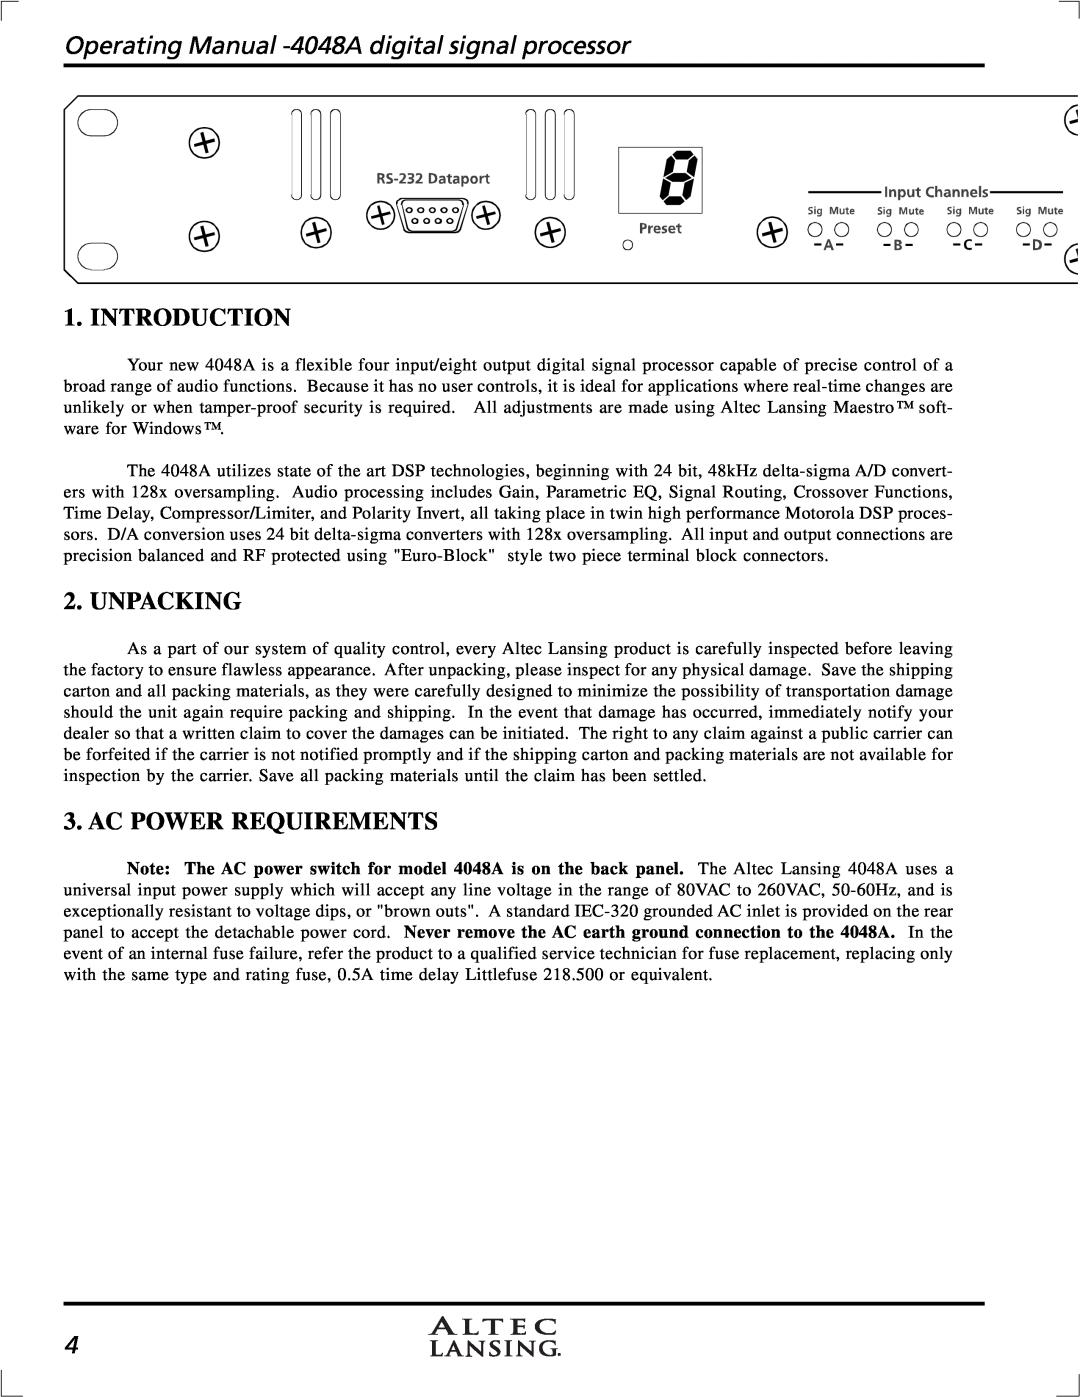 Altec Lansing digital signal processor, 4948A manual Introduction, Unpacking, Ac Power Requirements 